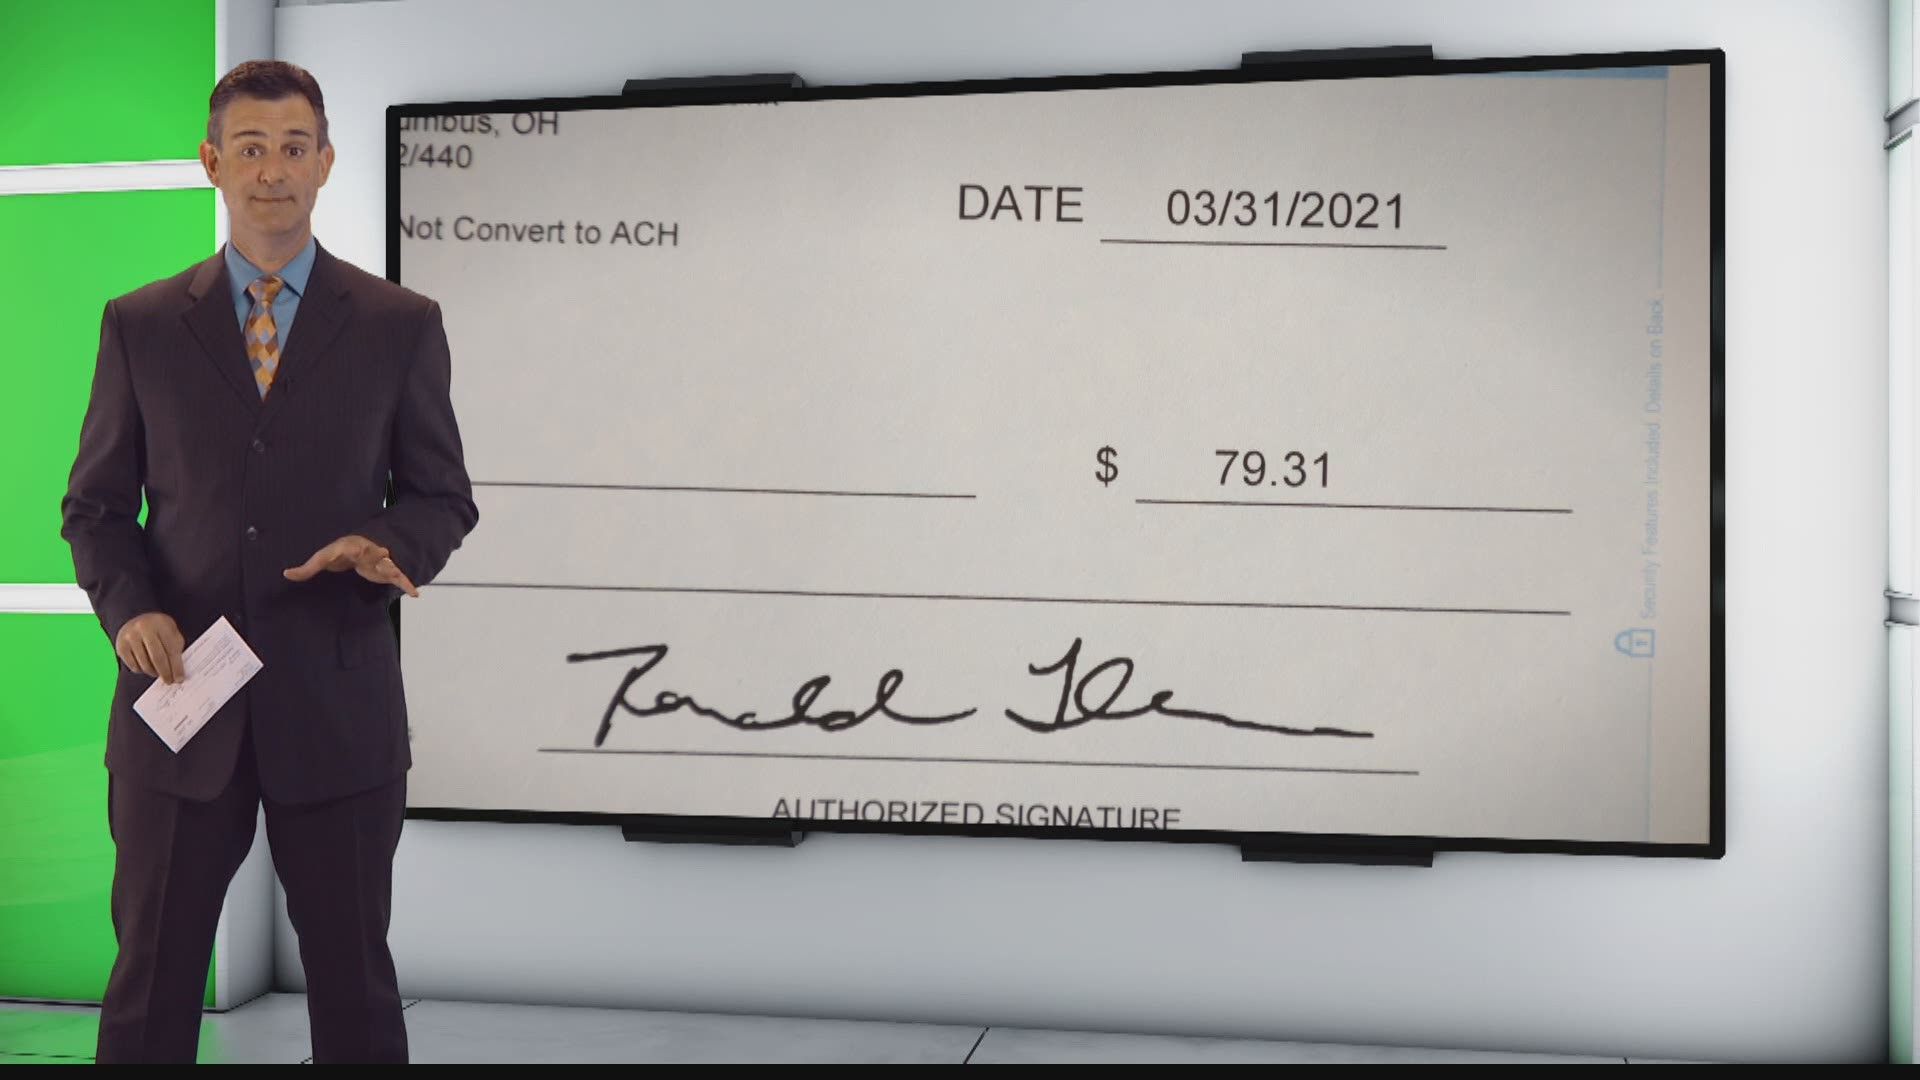 Lots of people are wondering about checks now showing up in their mailbox. Are they real or just a scam?